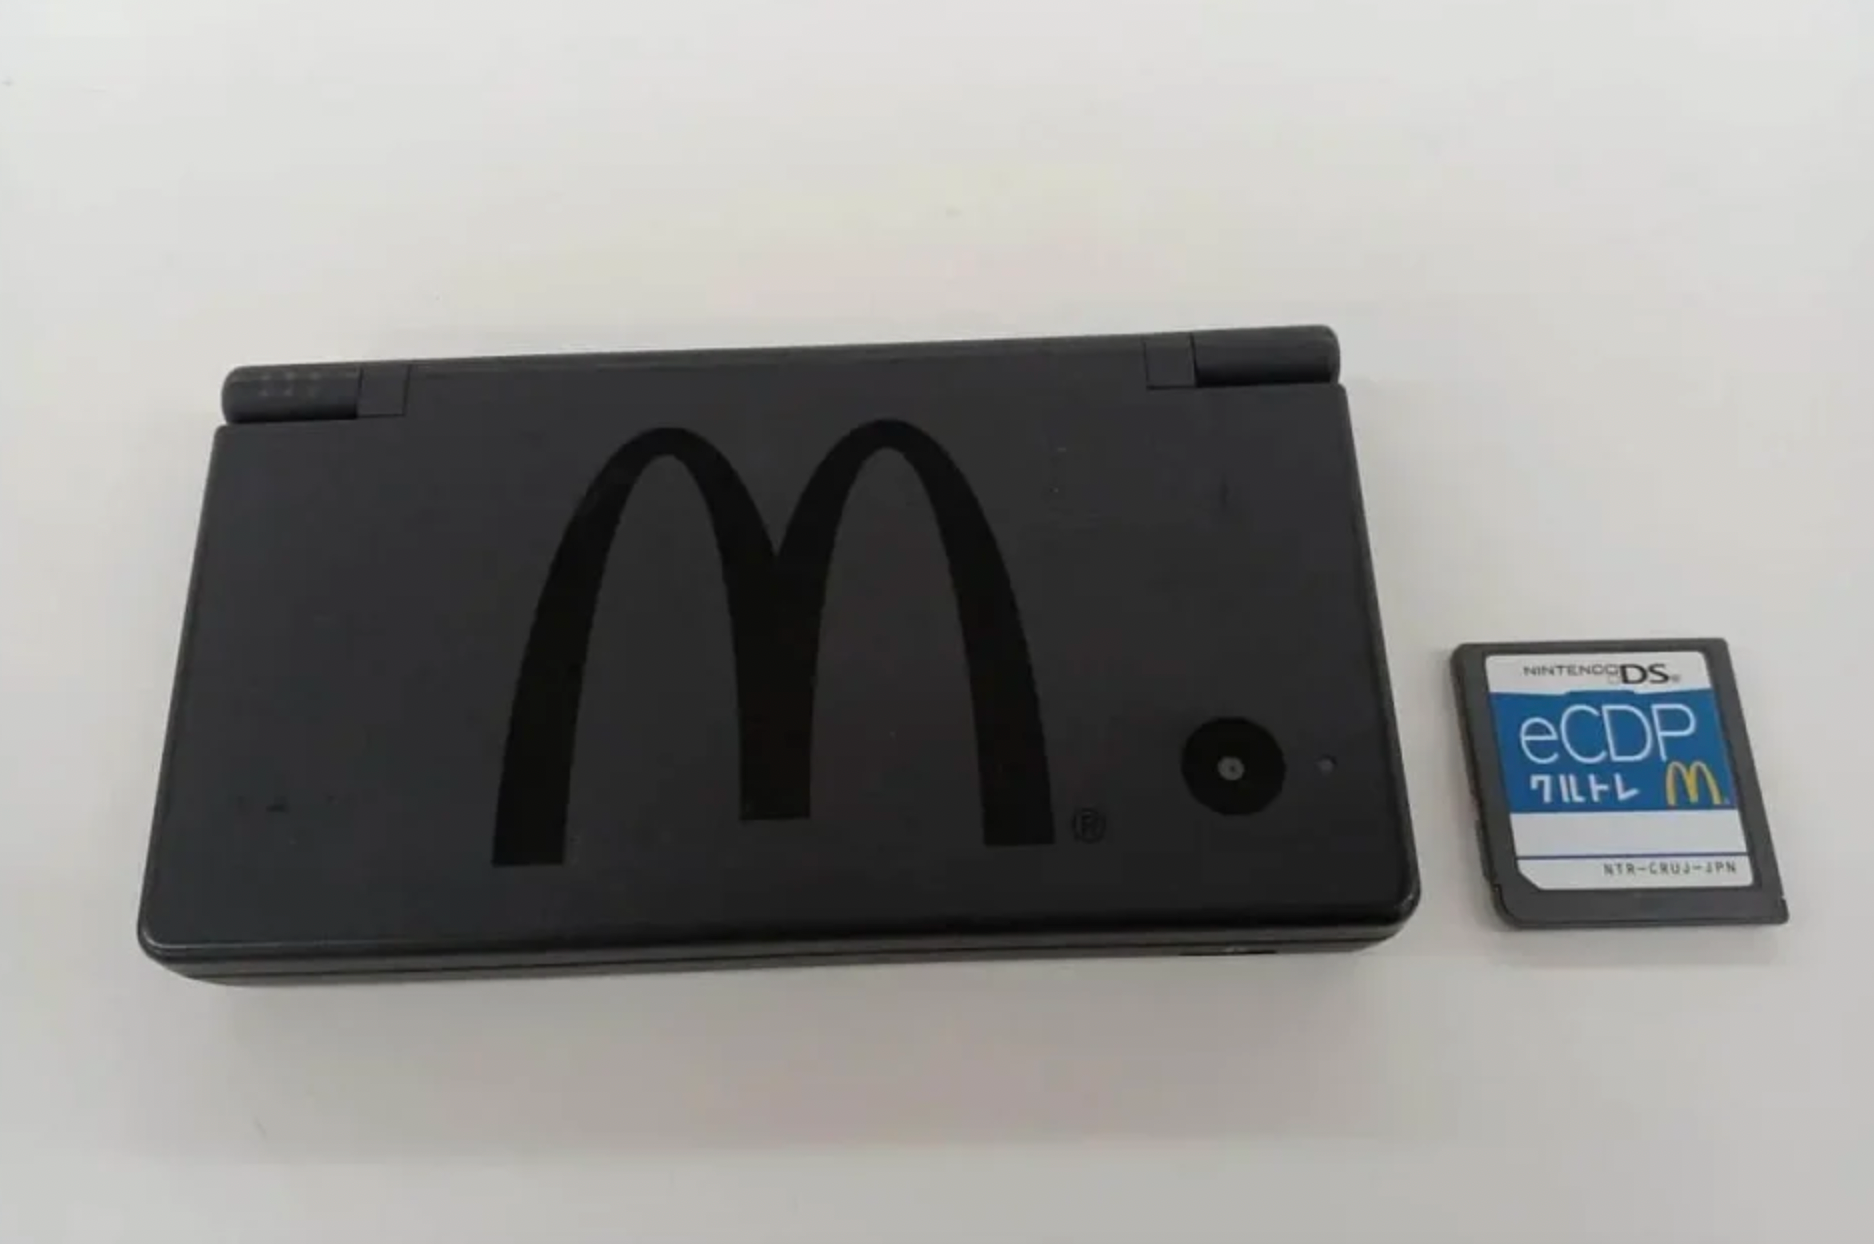 Rare McDonalds Themed Nintendo DSi Removed Swiftly from Japanese Resale Shop